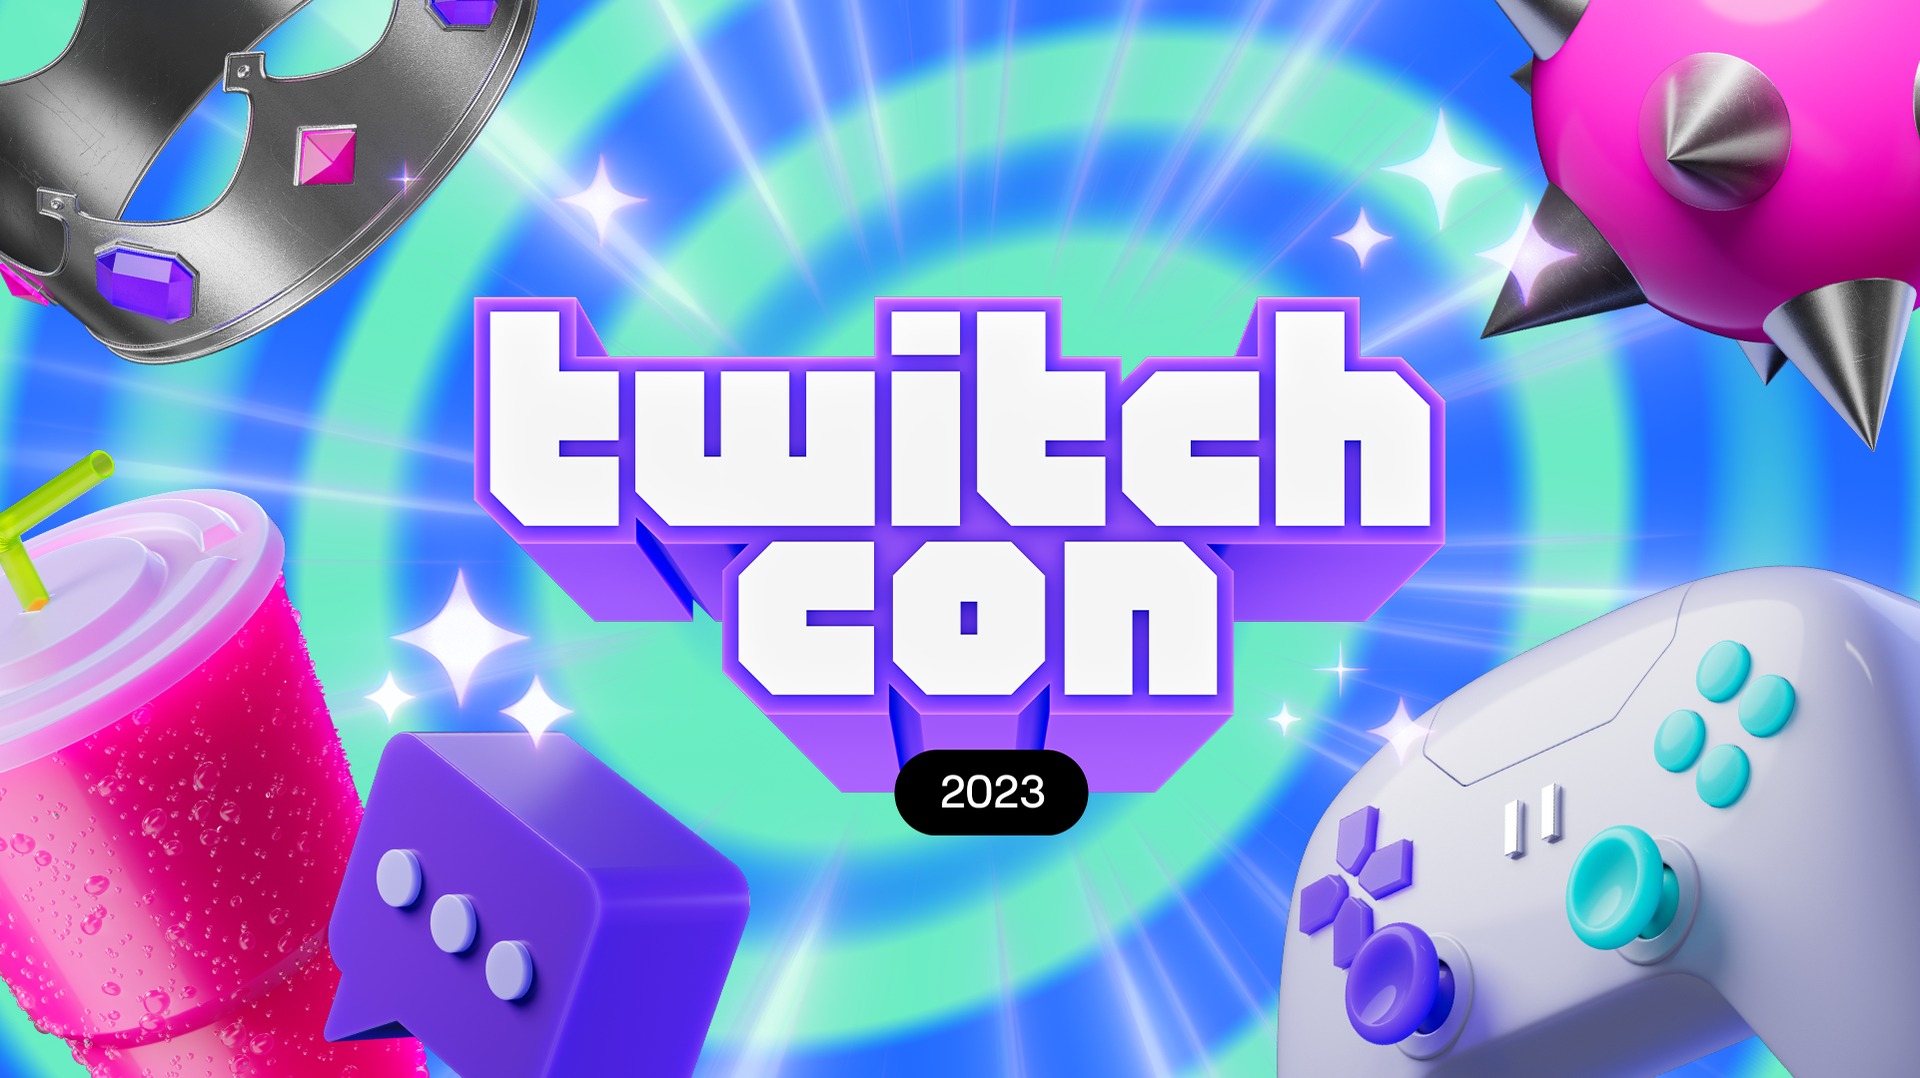 TwitchCon 2023 Events in Europe and the United States are announced